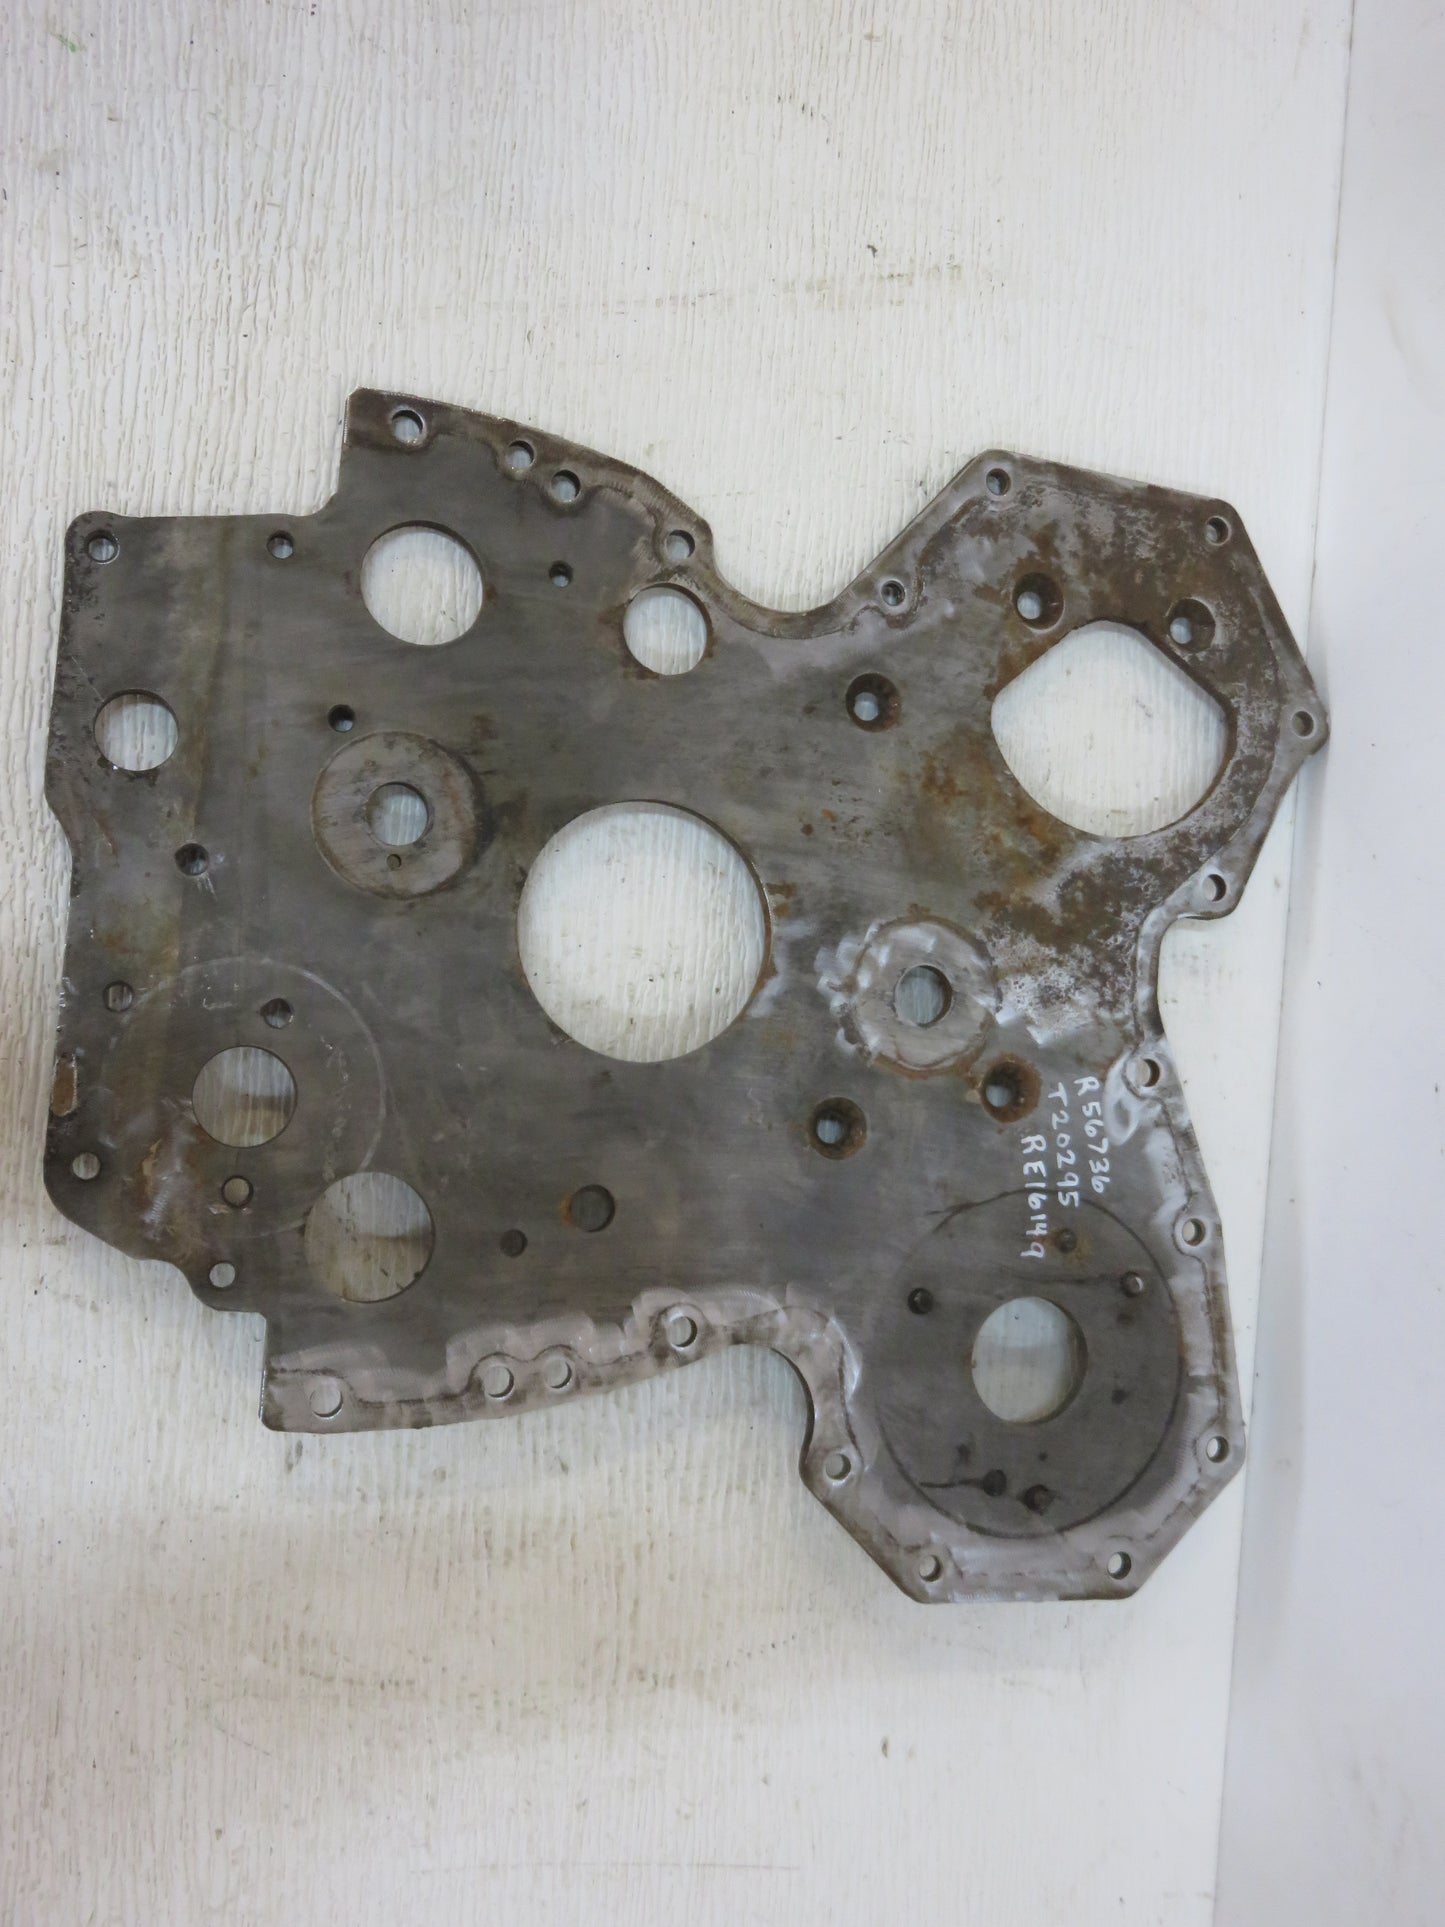 R56736, T20295, RE16149 John Deere Front Engine Plate For 1020, 1520, 1530, 2020, 2040